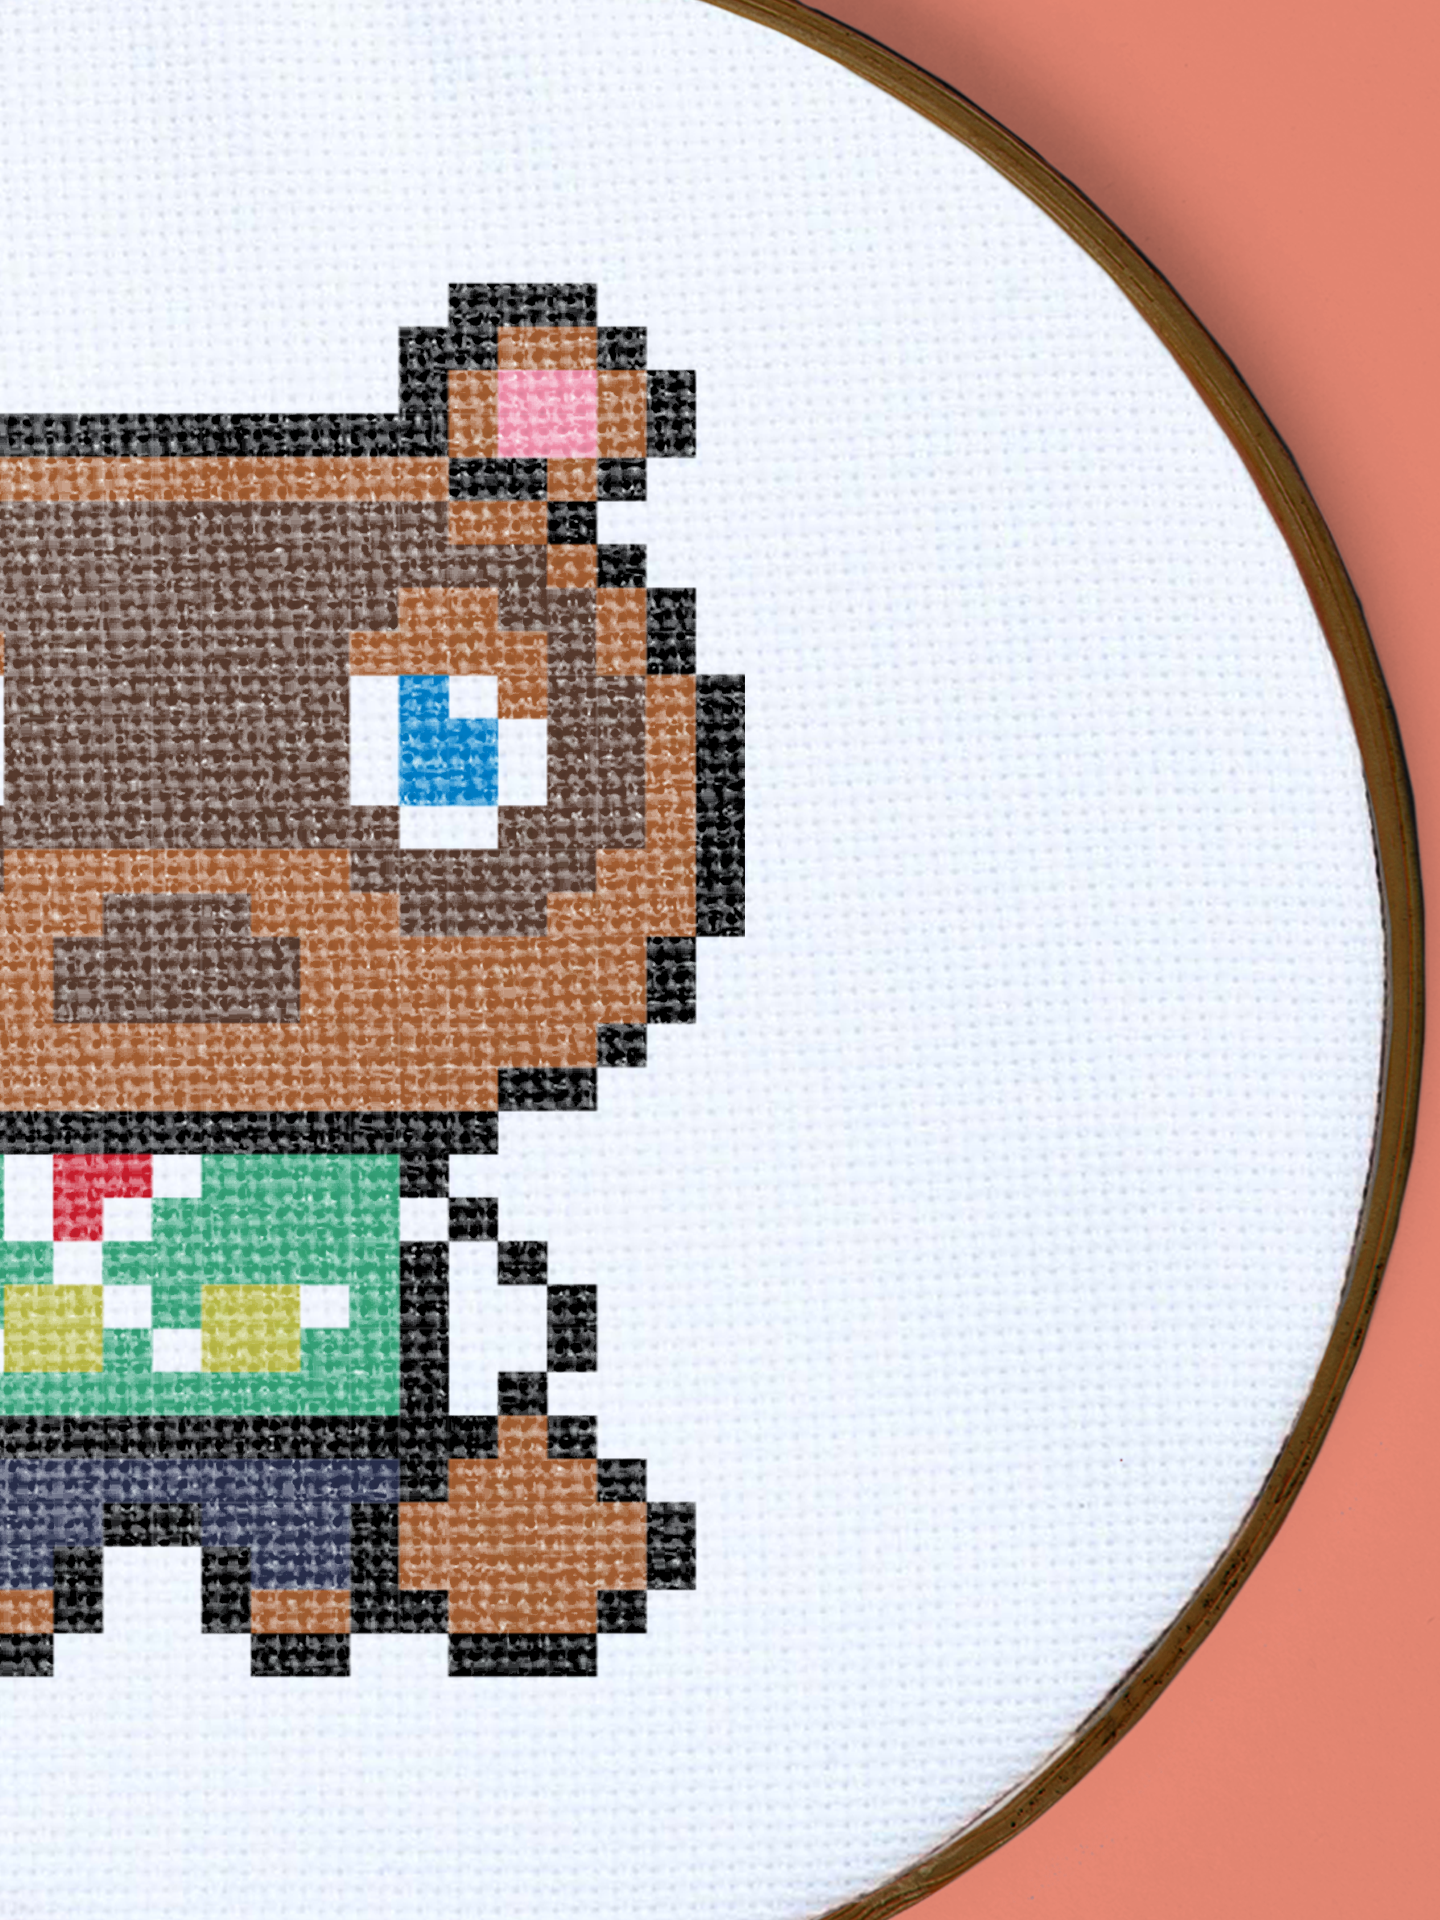 Rover Animal crossing cross stitch pattern embroidery pattern instant download PDF